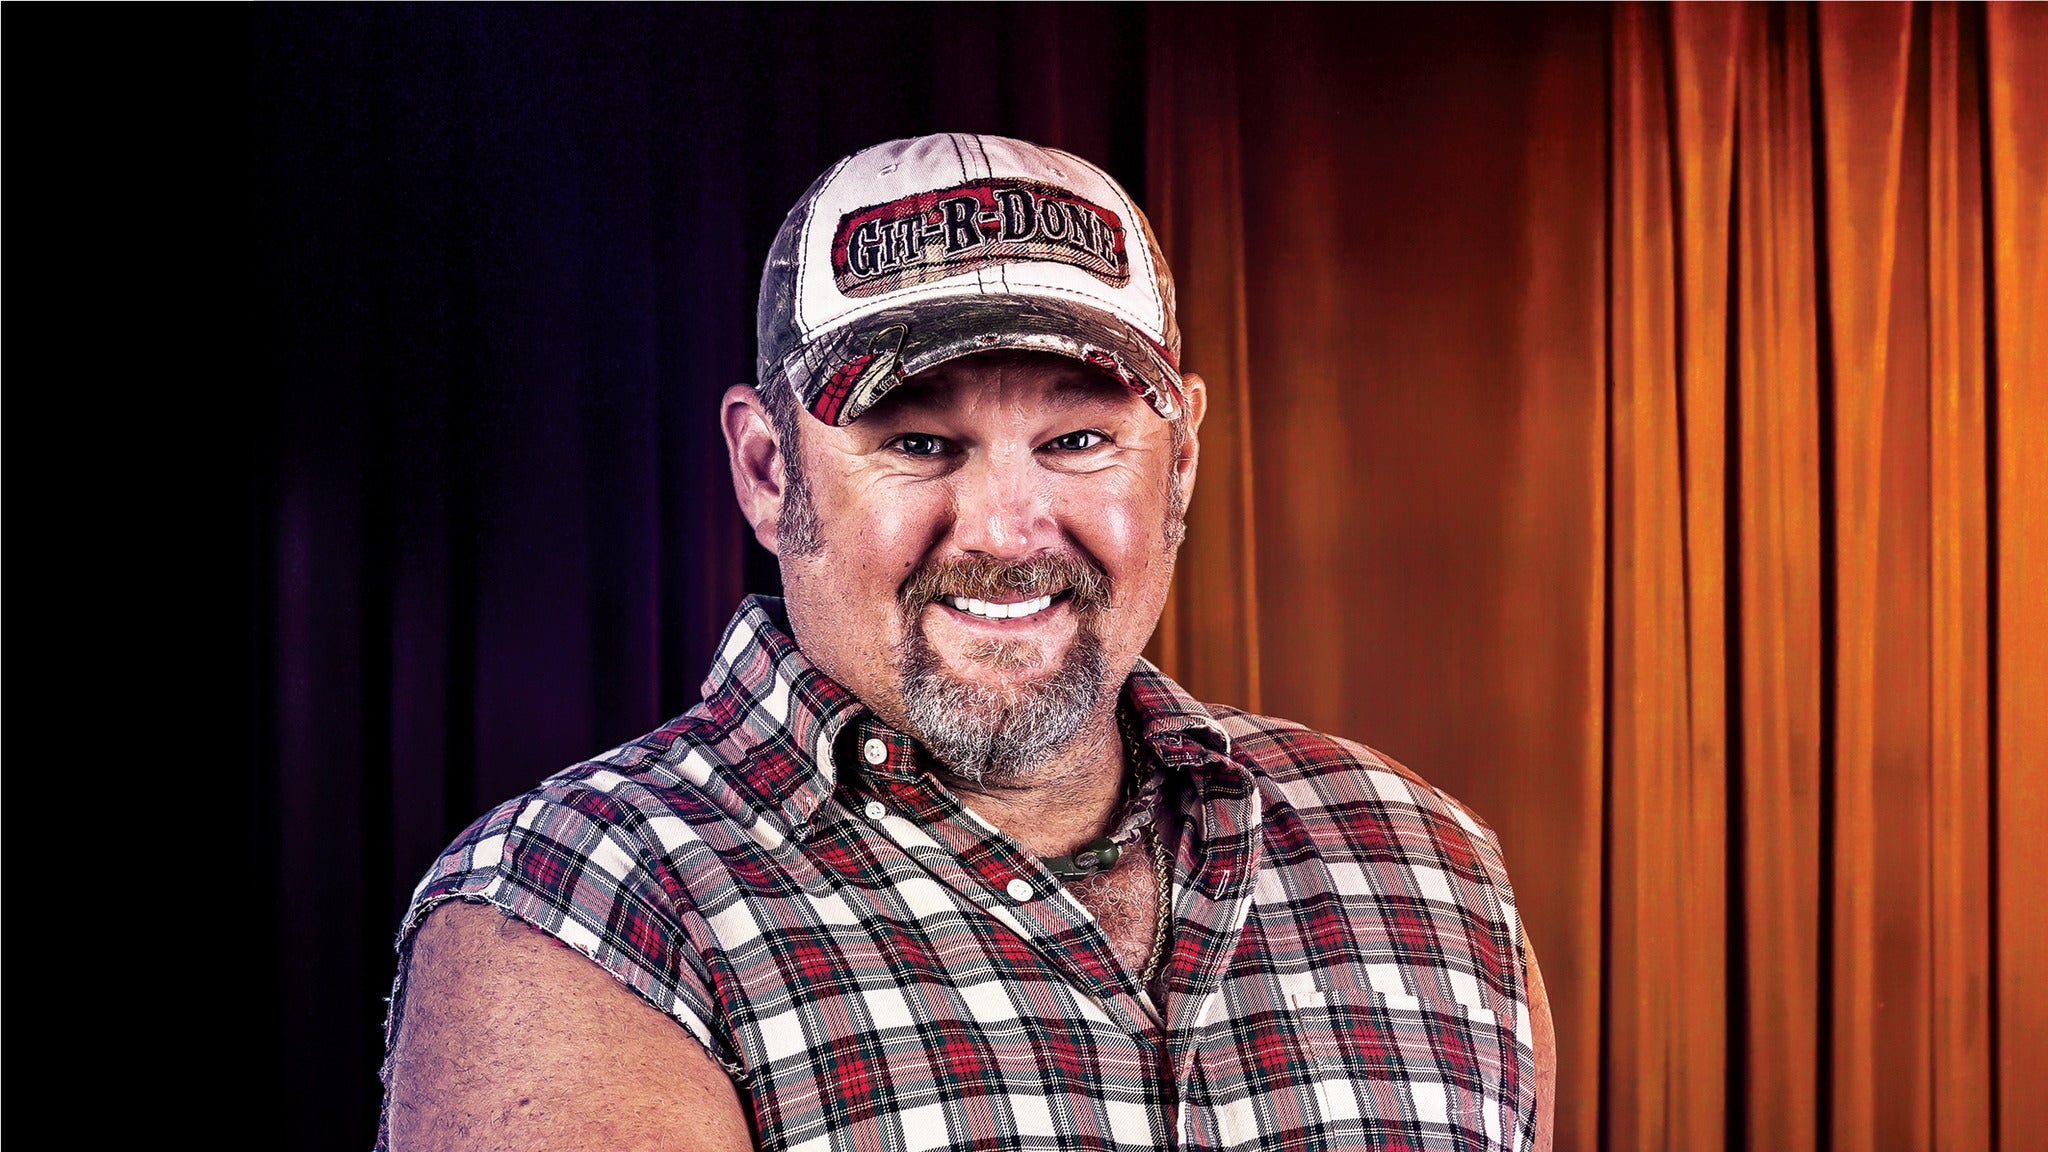 Larry the Cable Guy's Net Worth